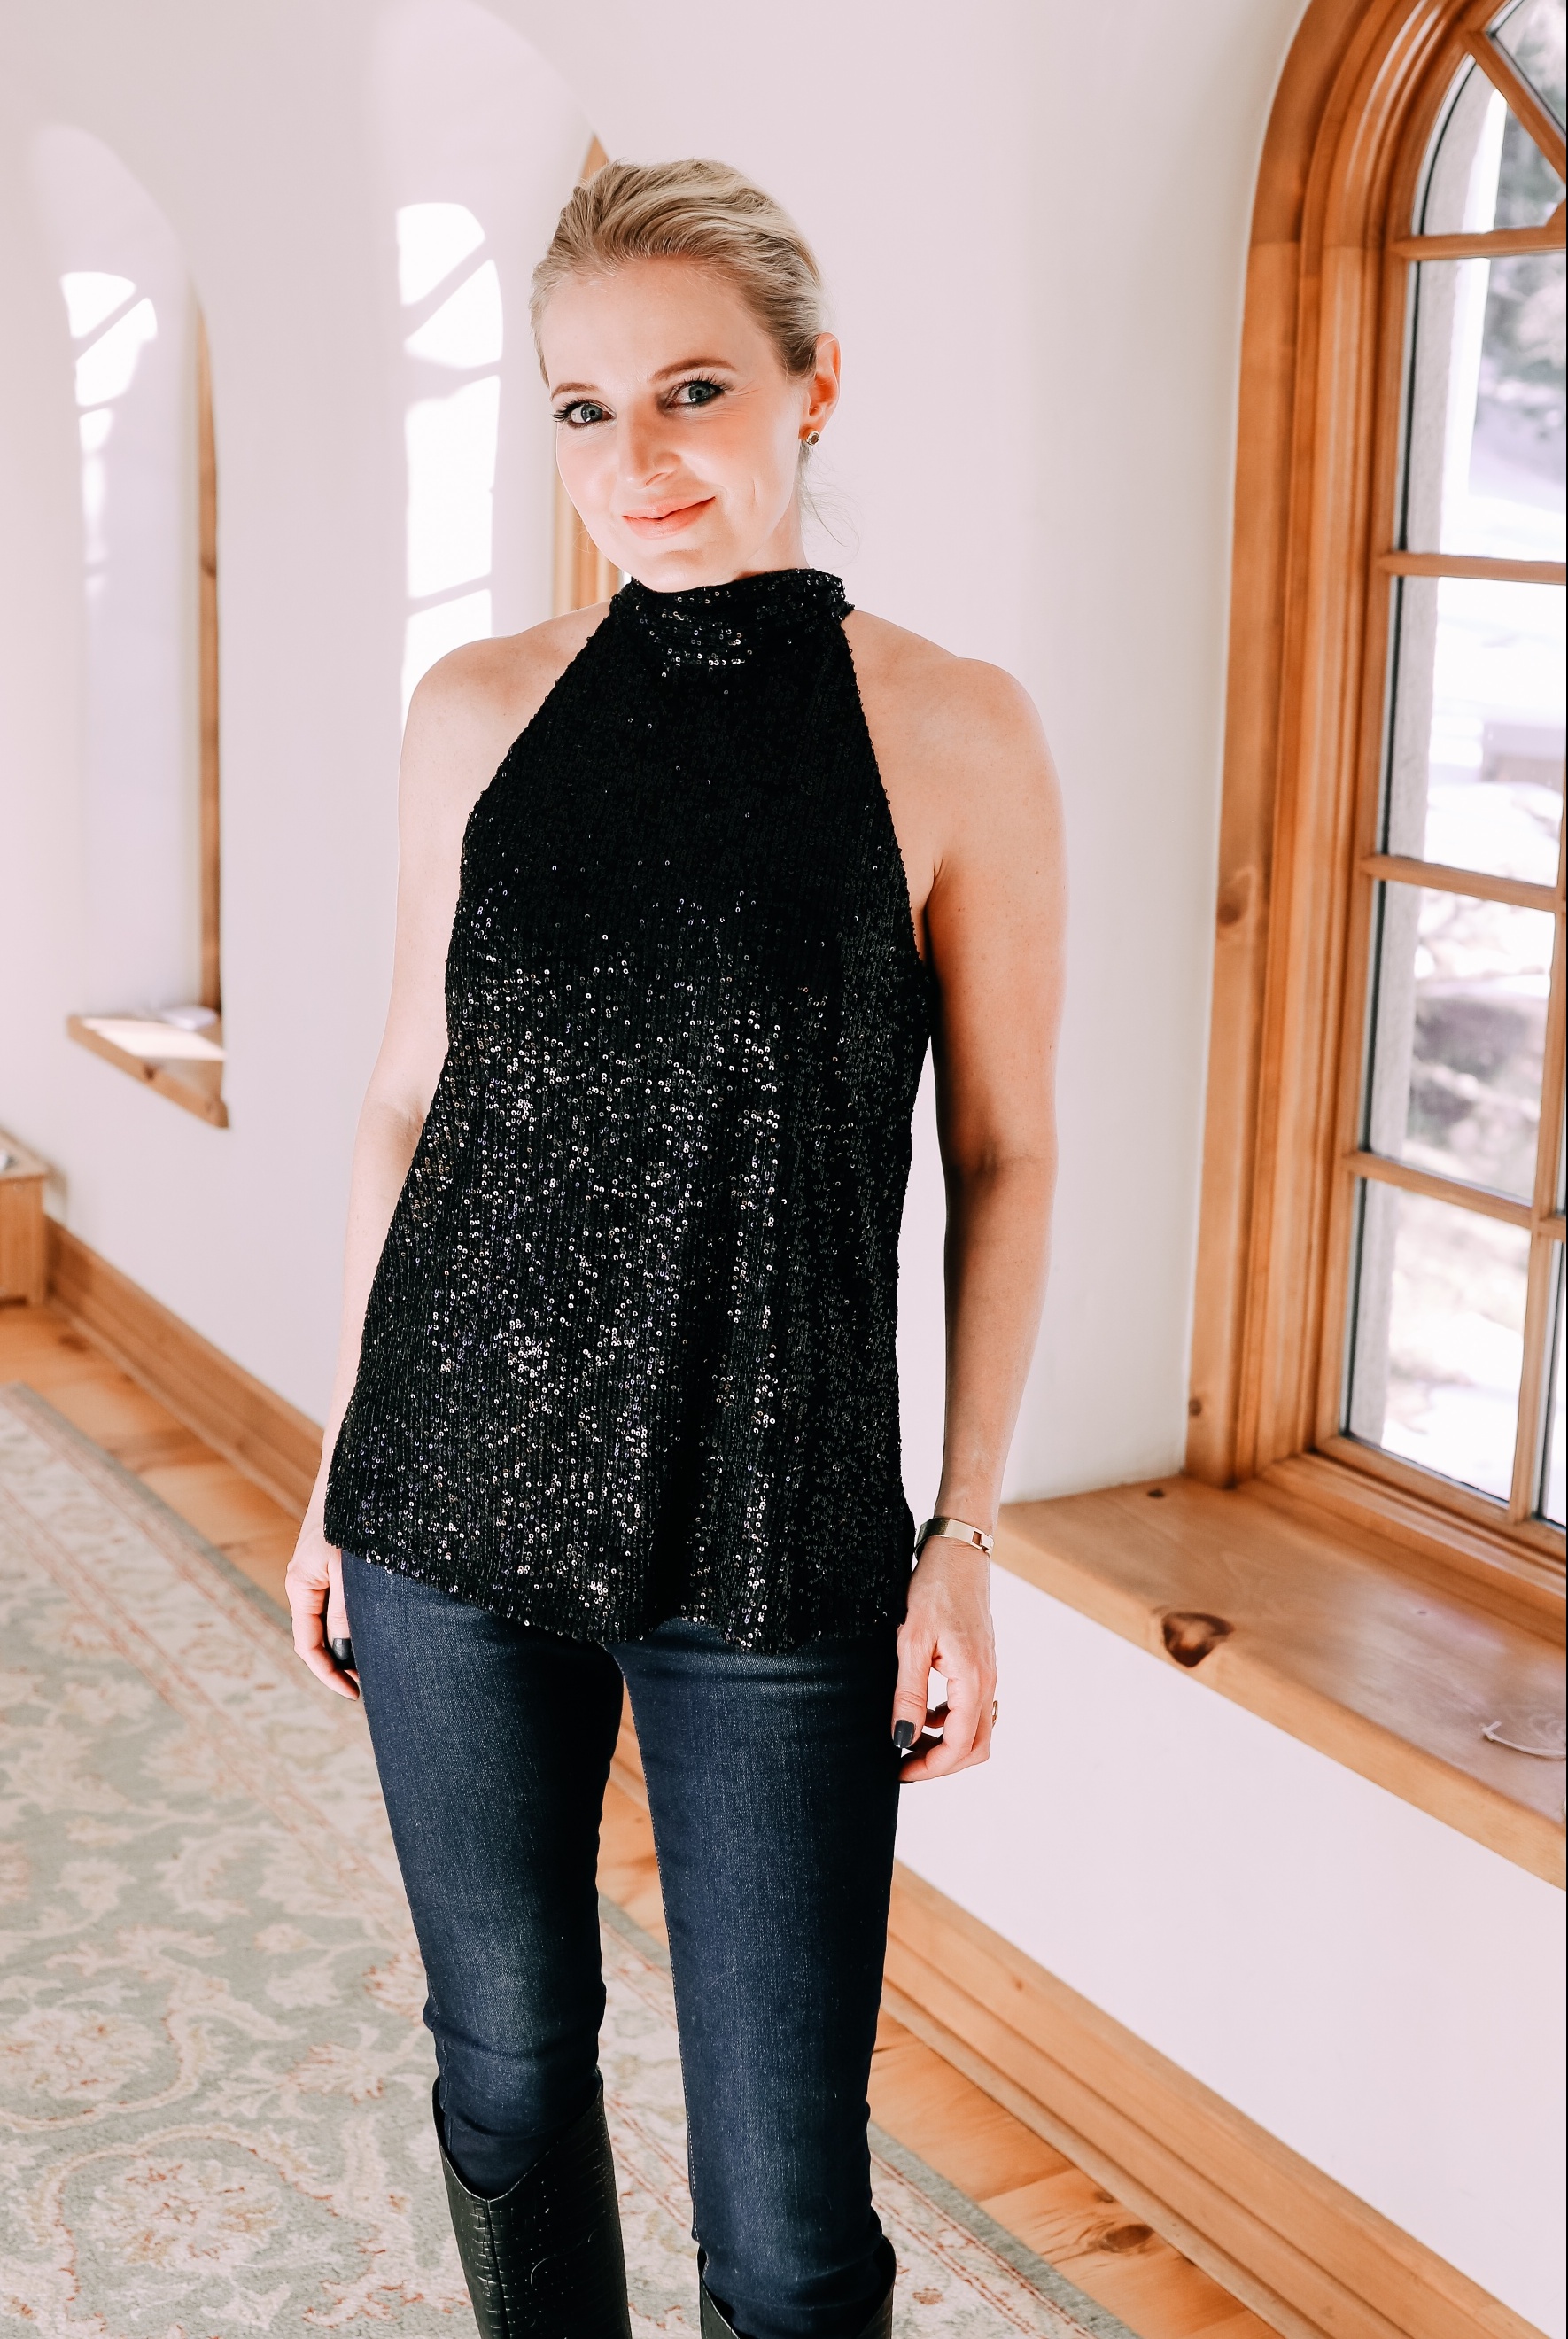 Holiday Outfits With Jeans, Erin Busbee of Busbee Style wearing a black sequin halter neck blouse by Chelsea28, L'Agence dark wash skinny jeans, and black snake embossed boots by Schutz from Nordstrom in Telluride, Colorado